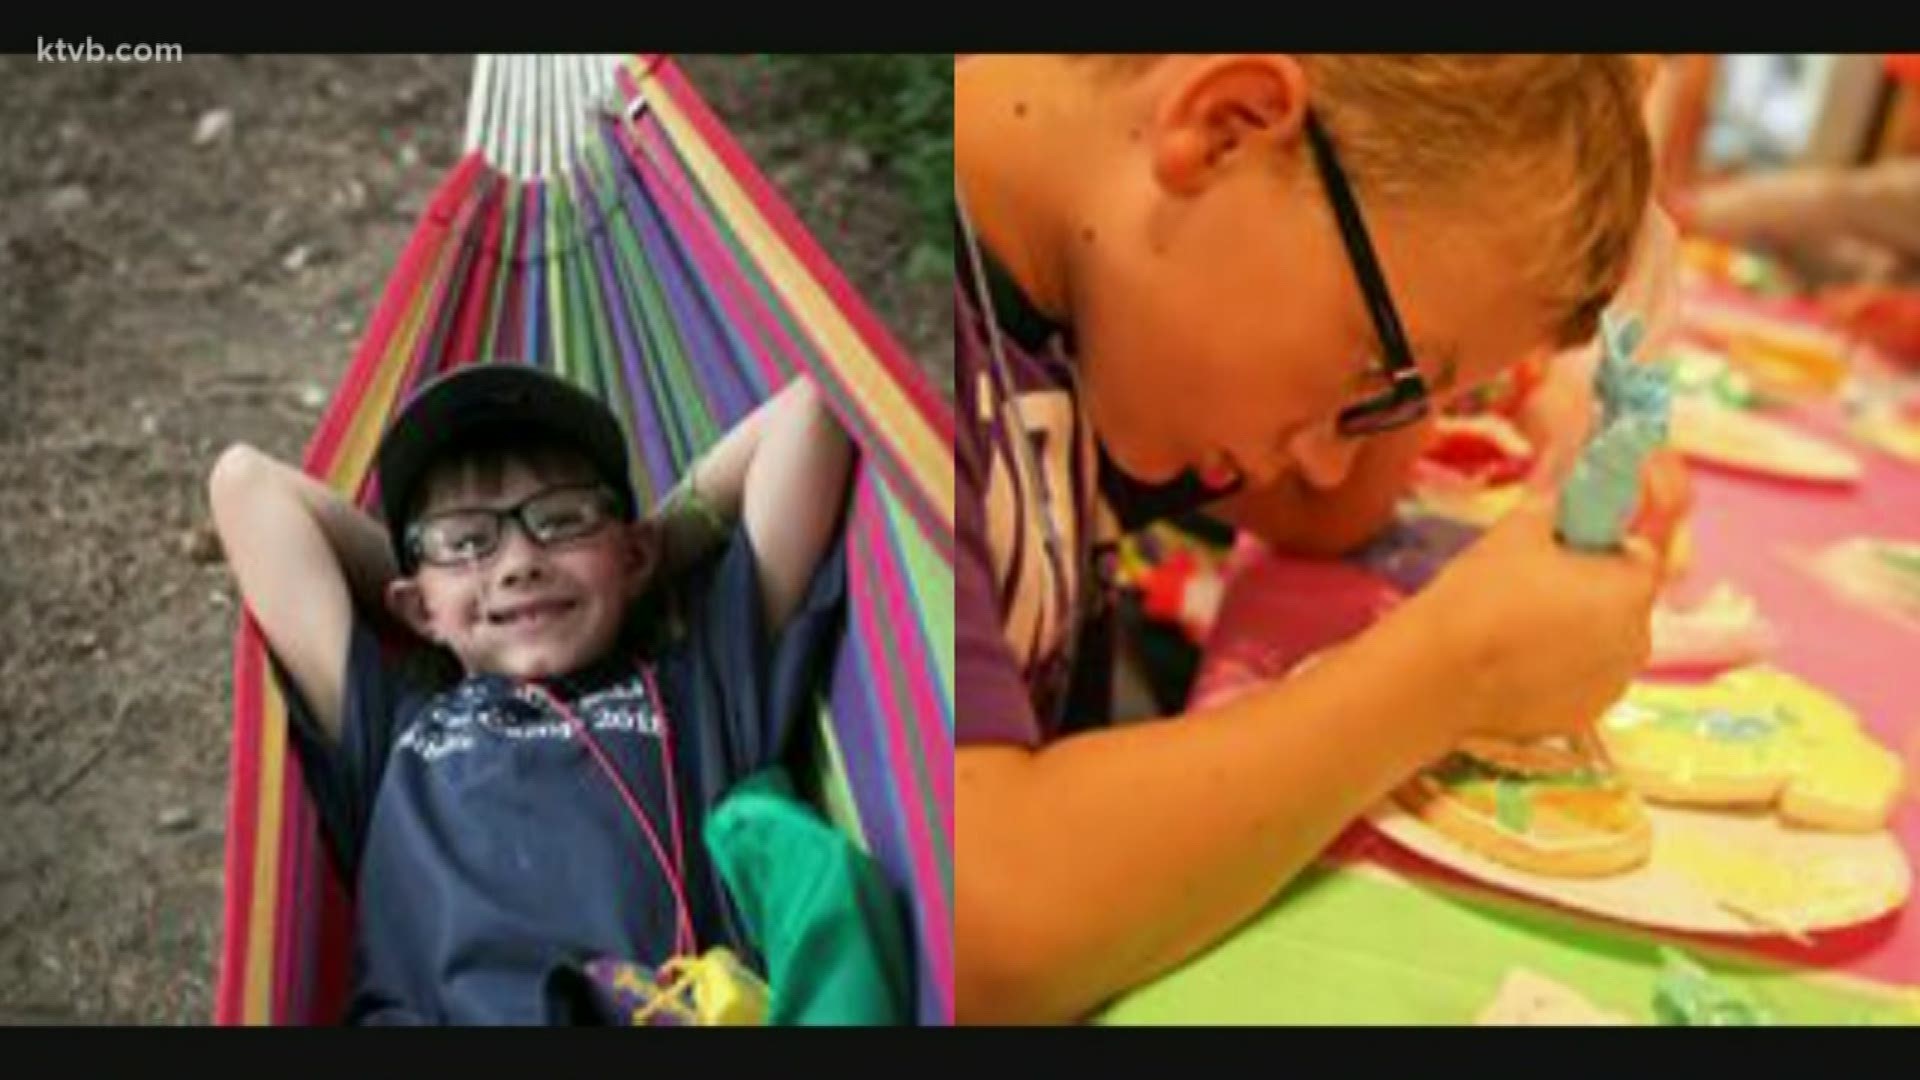 The camp supports children who are diagnosed with cancer. This summer they'll be holding a virtual camp.